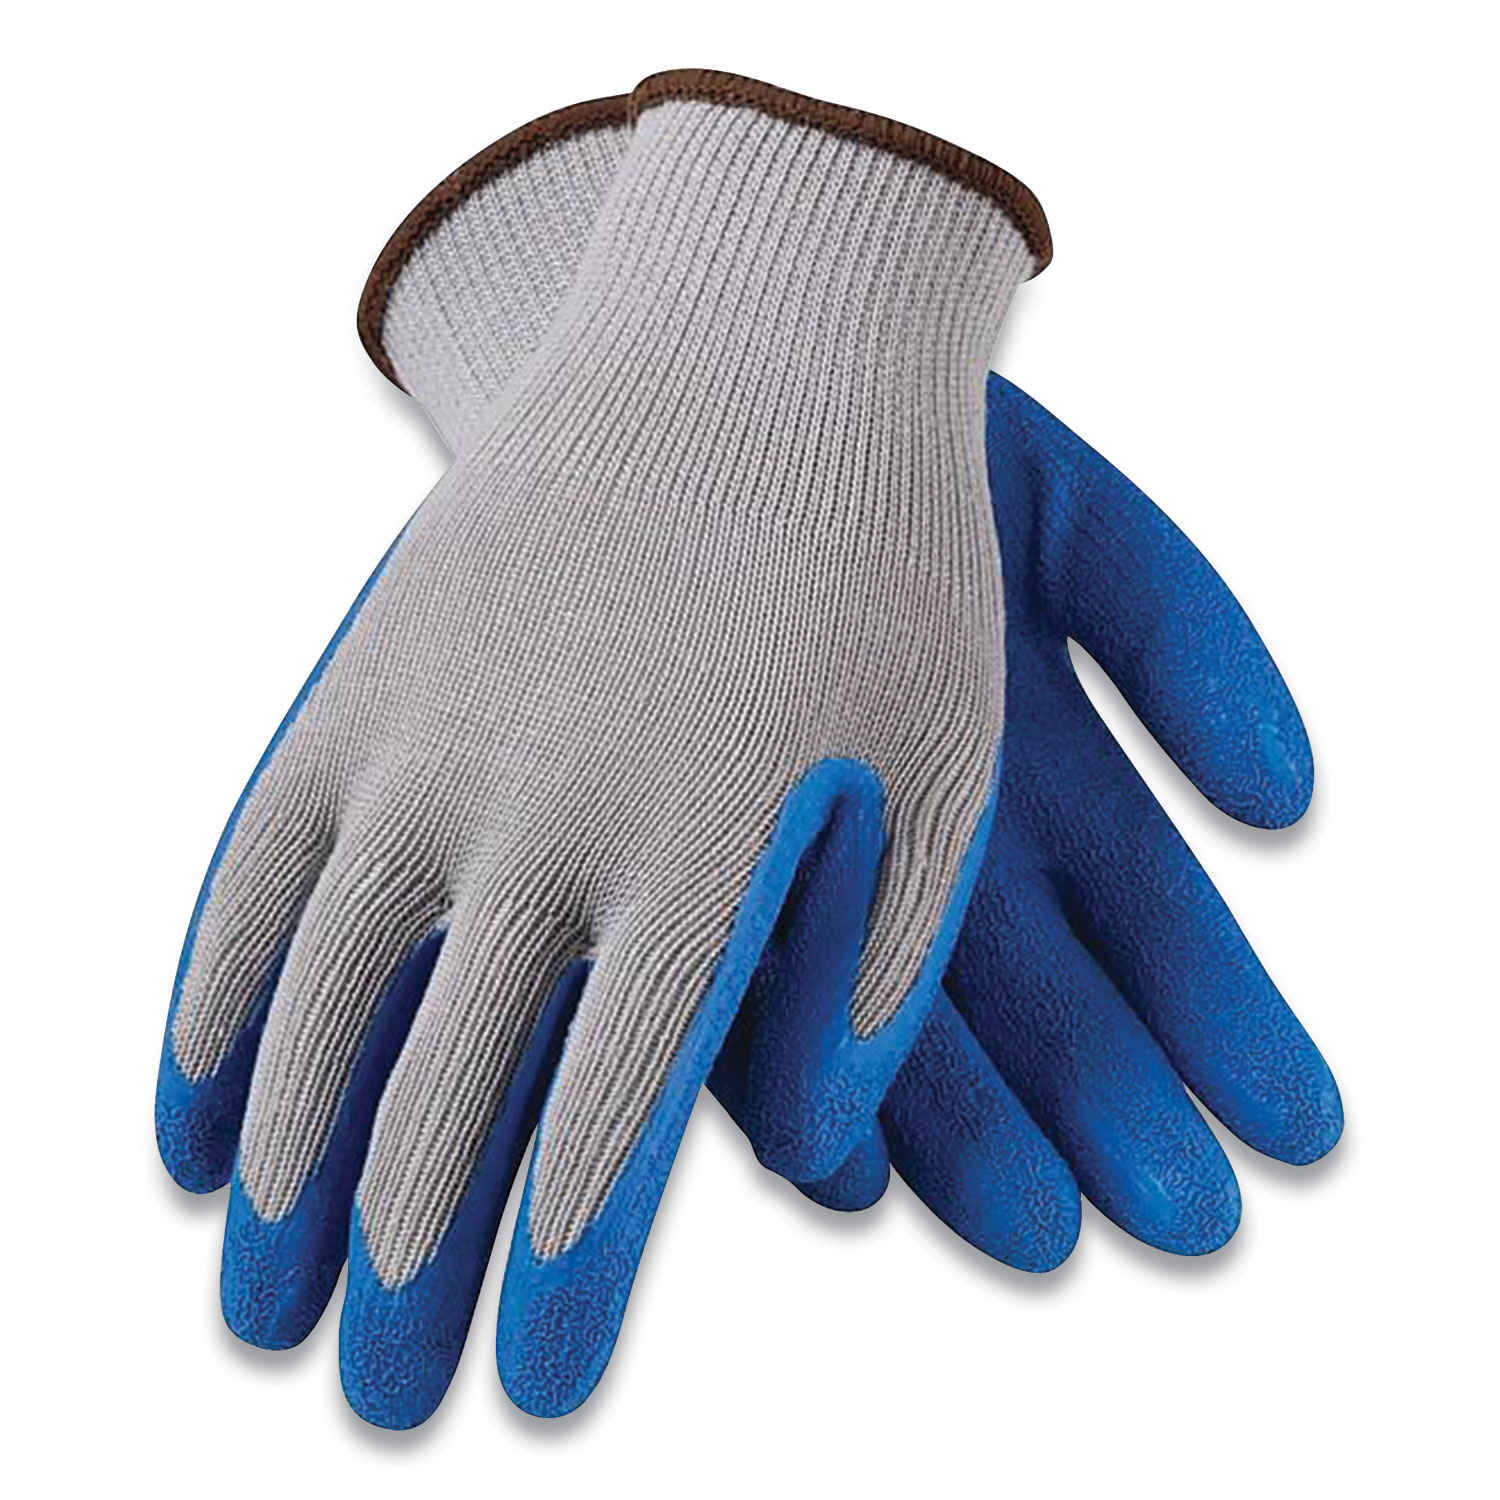 G-Tek® GP Latex-Coated Cotton/Polyester Gloves, X-Large, Gray/Blue, 12 Pairs